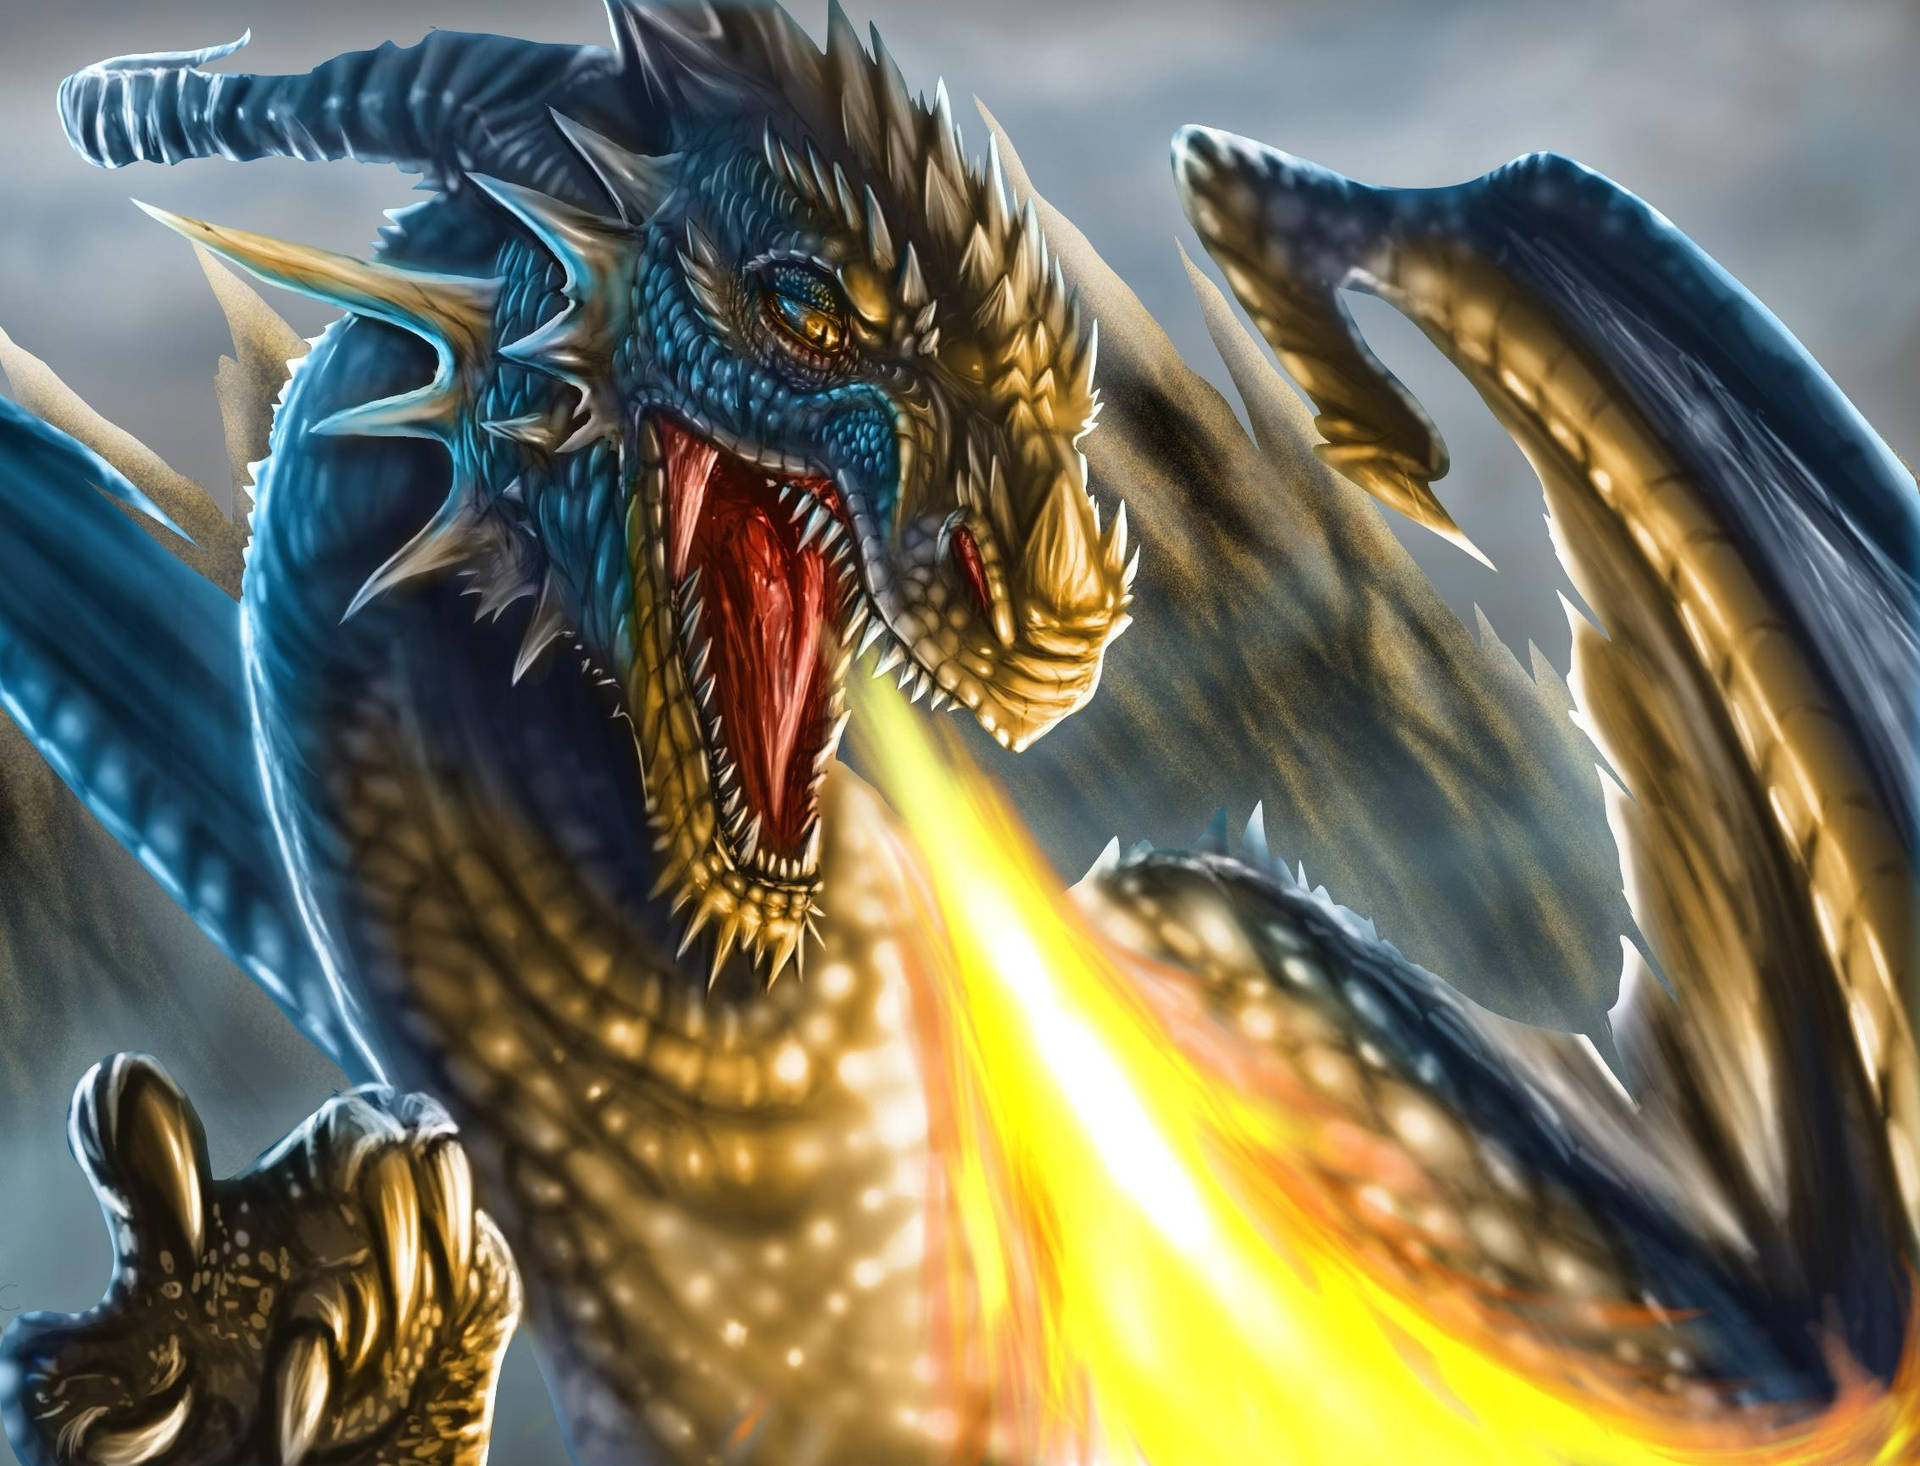 "A Thorny Fire Breathing Dragon - A Rare Sight" Wallpaper